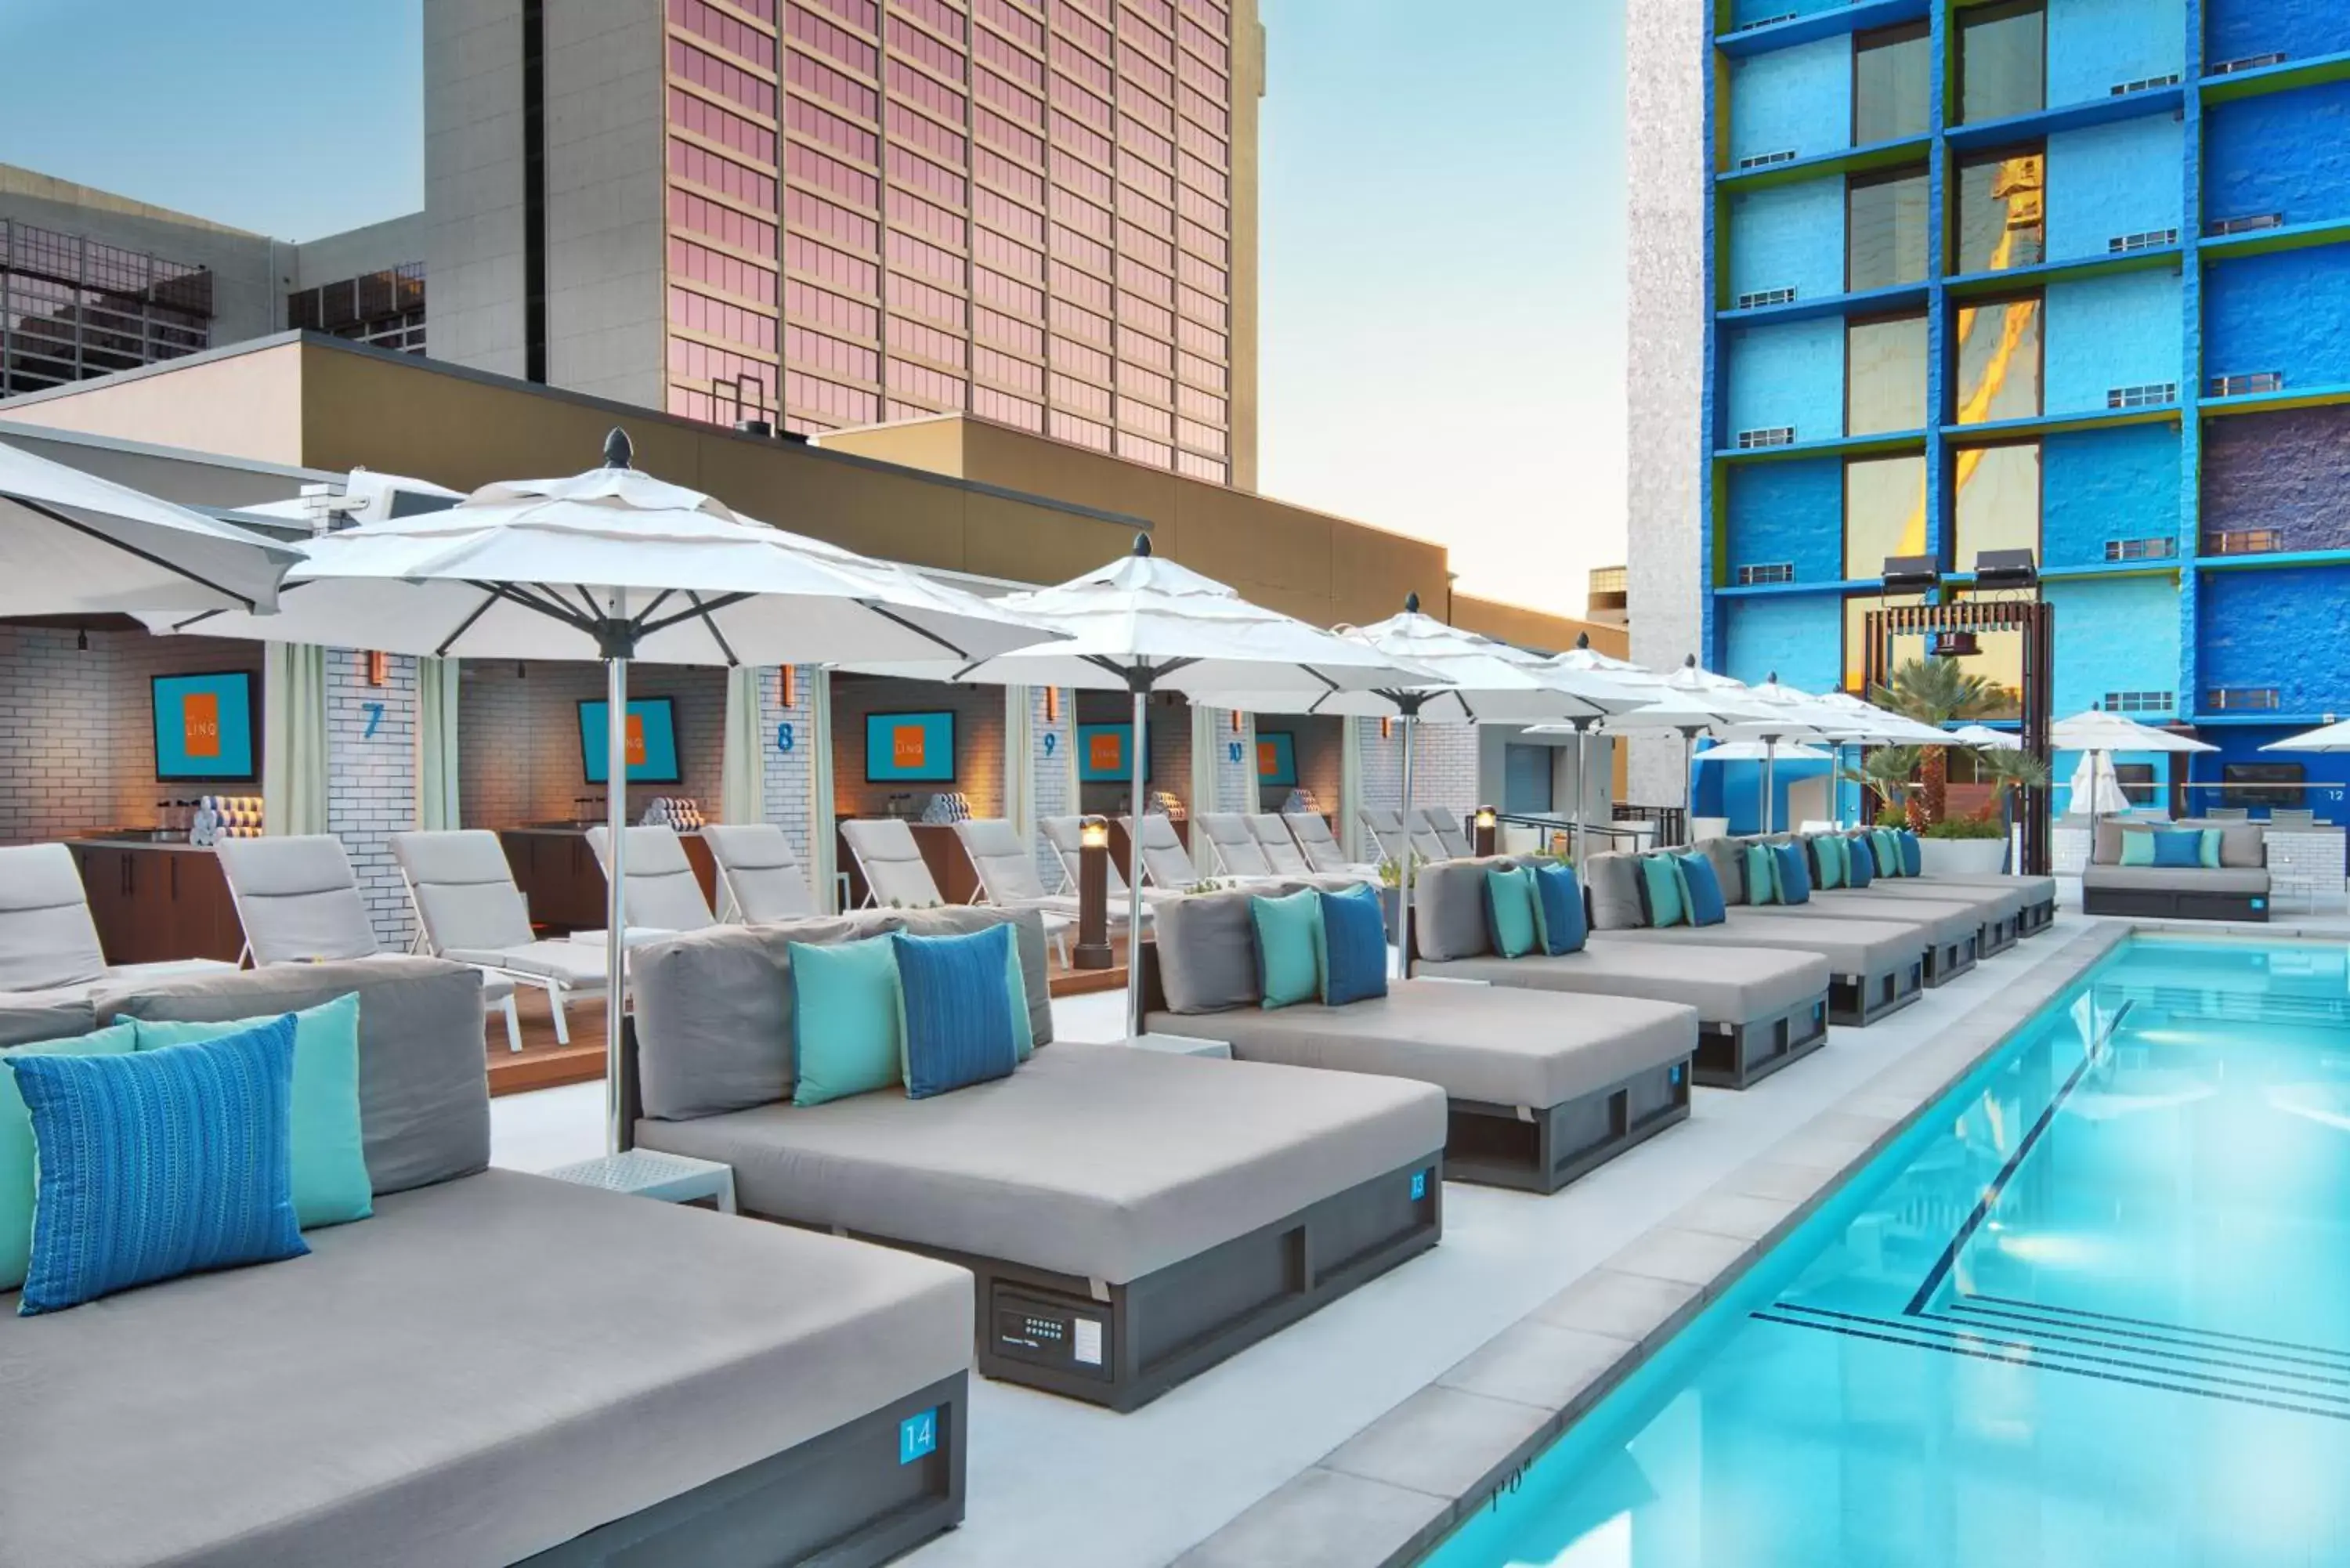 Swimming Pool in The LINQ Hotel and Casino